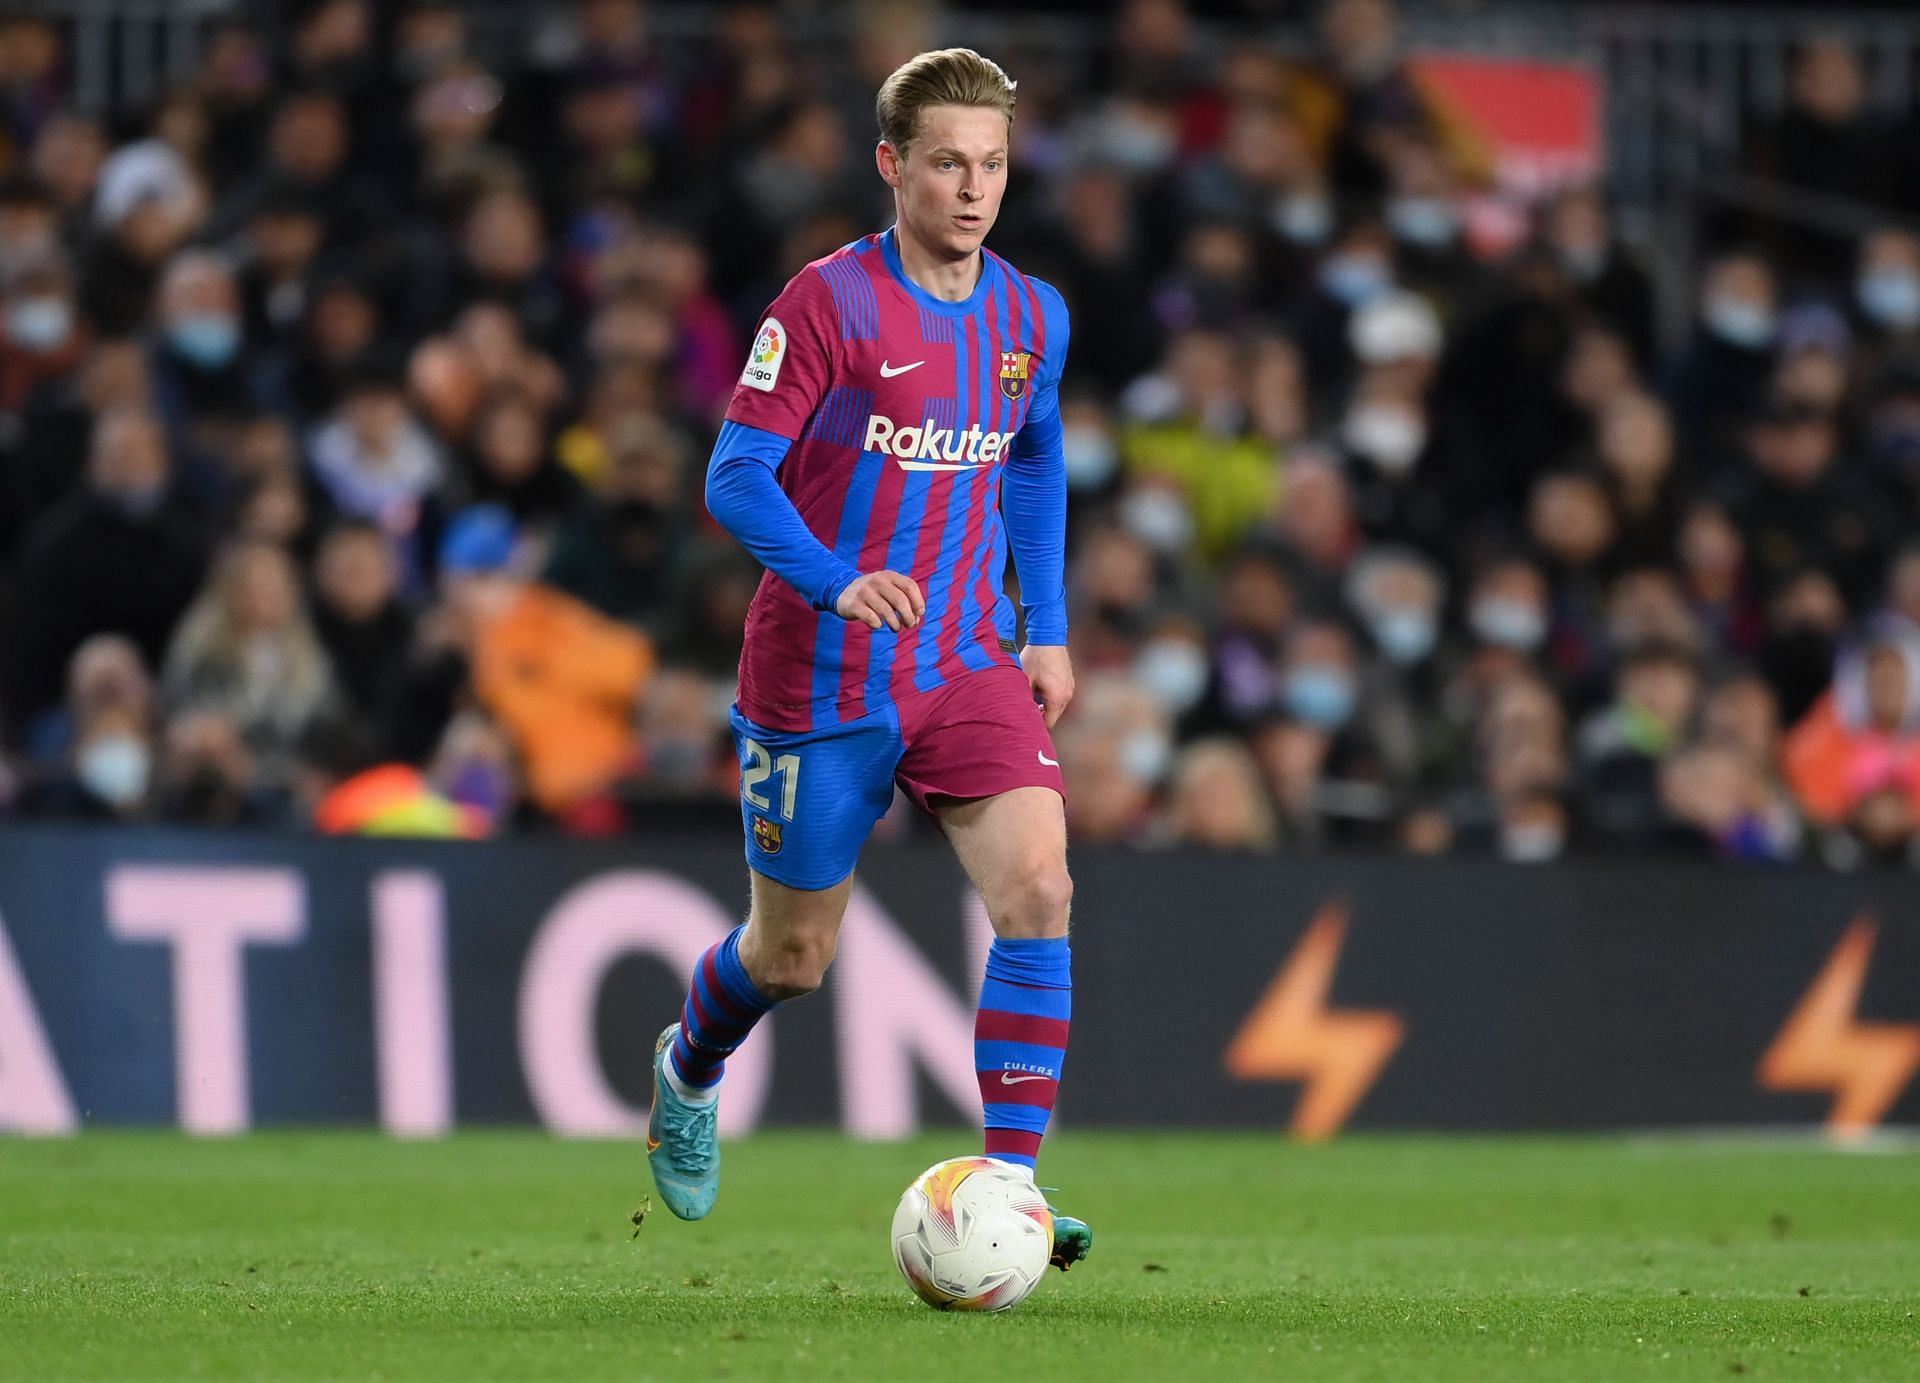 Frenkie de Jong could leave Barcelona this summer despite his obvious quality.